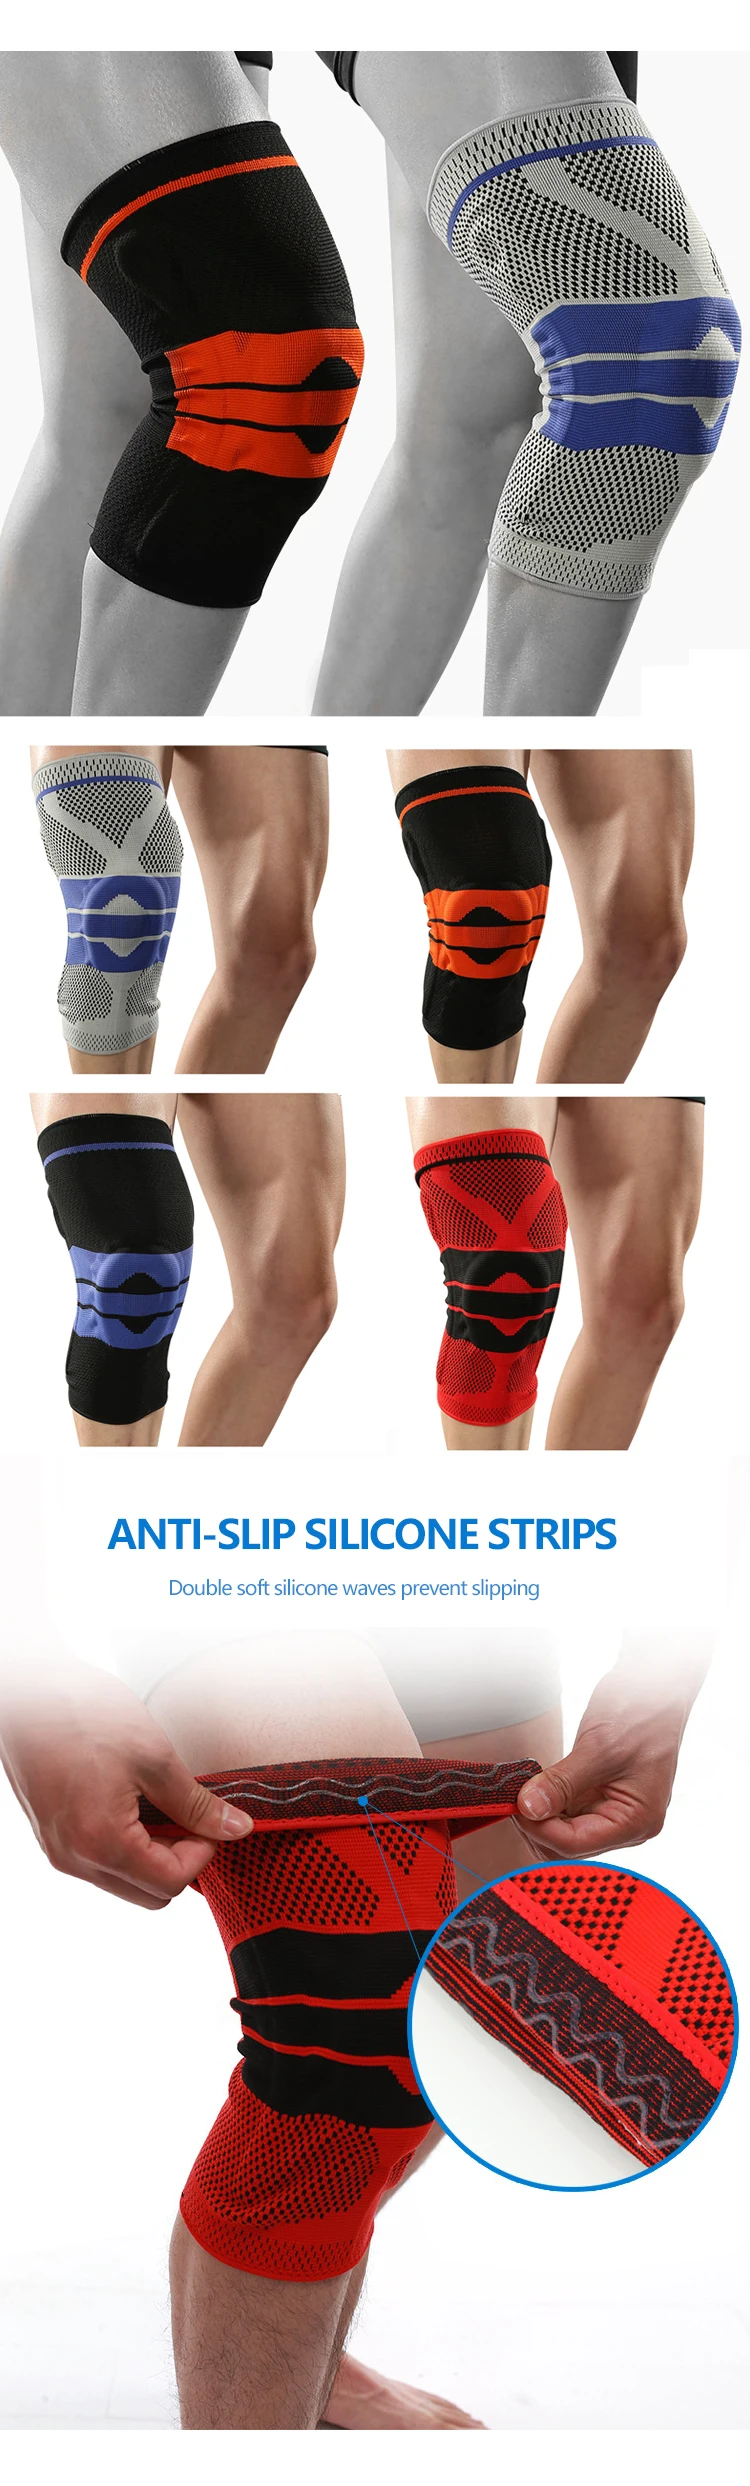 Enerup Soft Compression Sports Silicone Spring Full Powerlifting Knee Pad Support Brace Sleeve